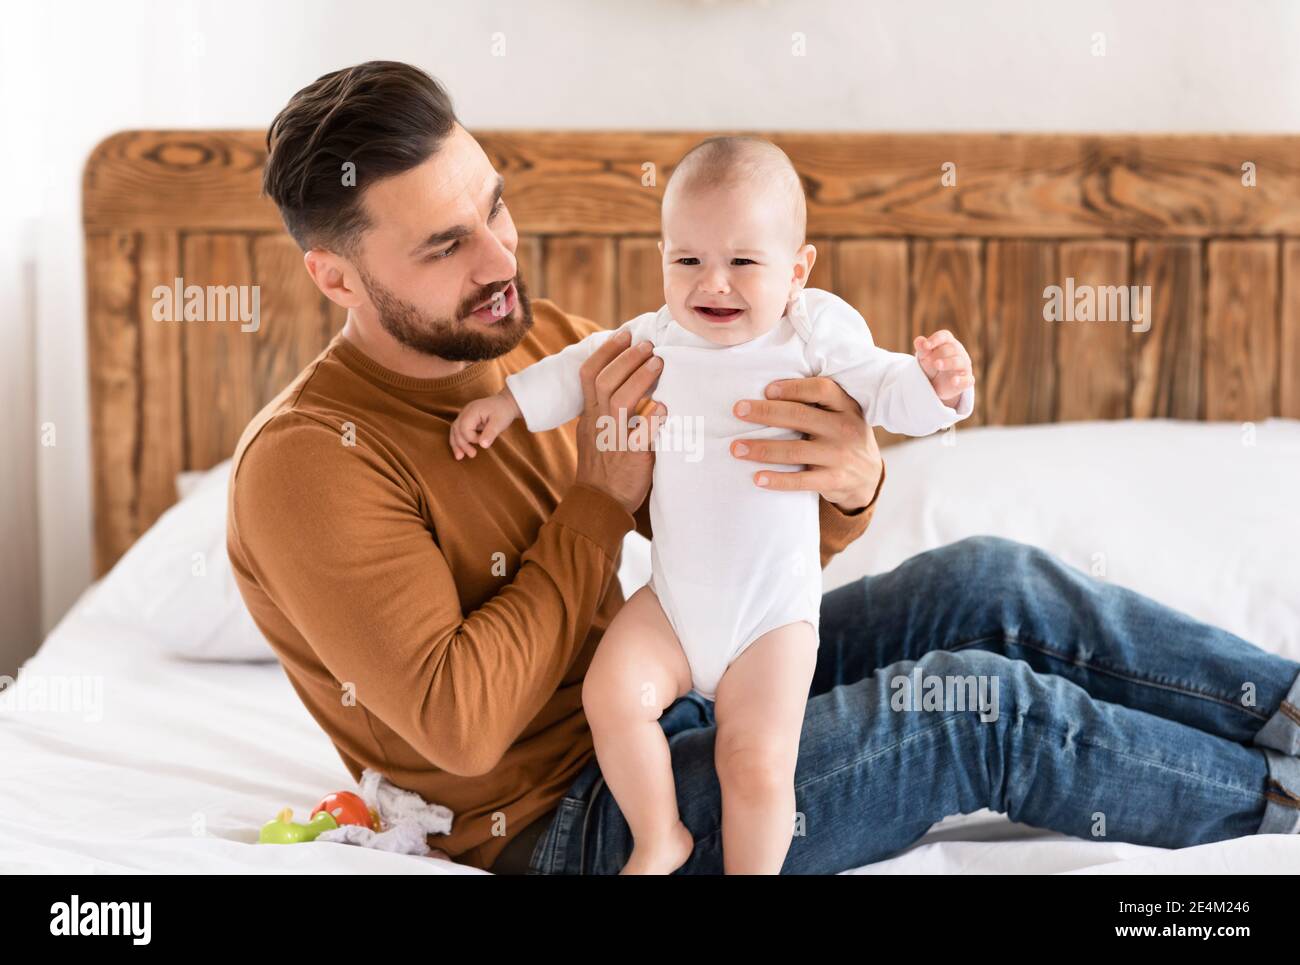 Baby Toddler Crying While Father Playing With Her At Home Stock Photo